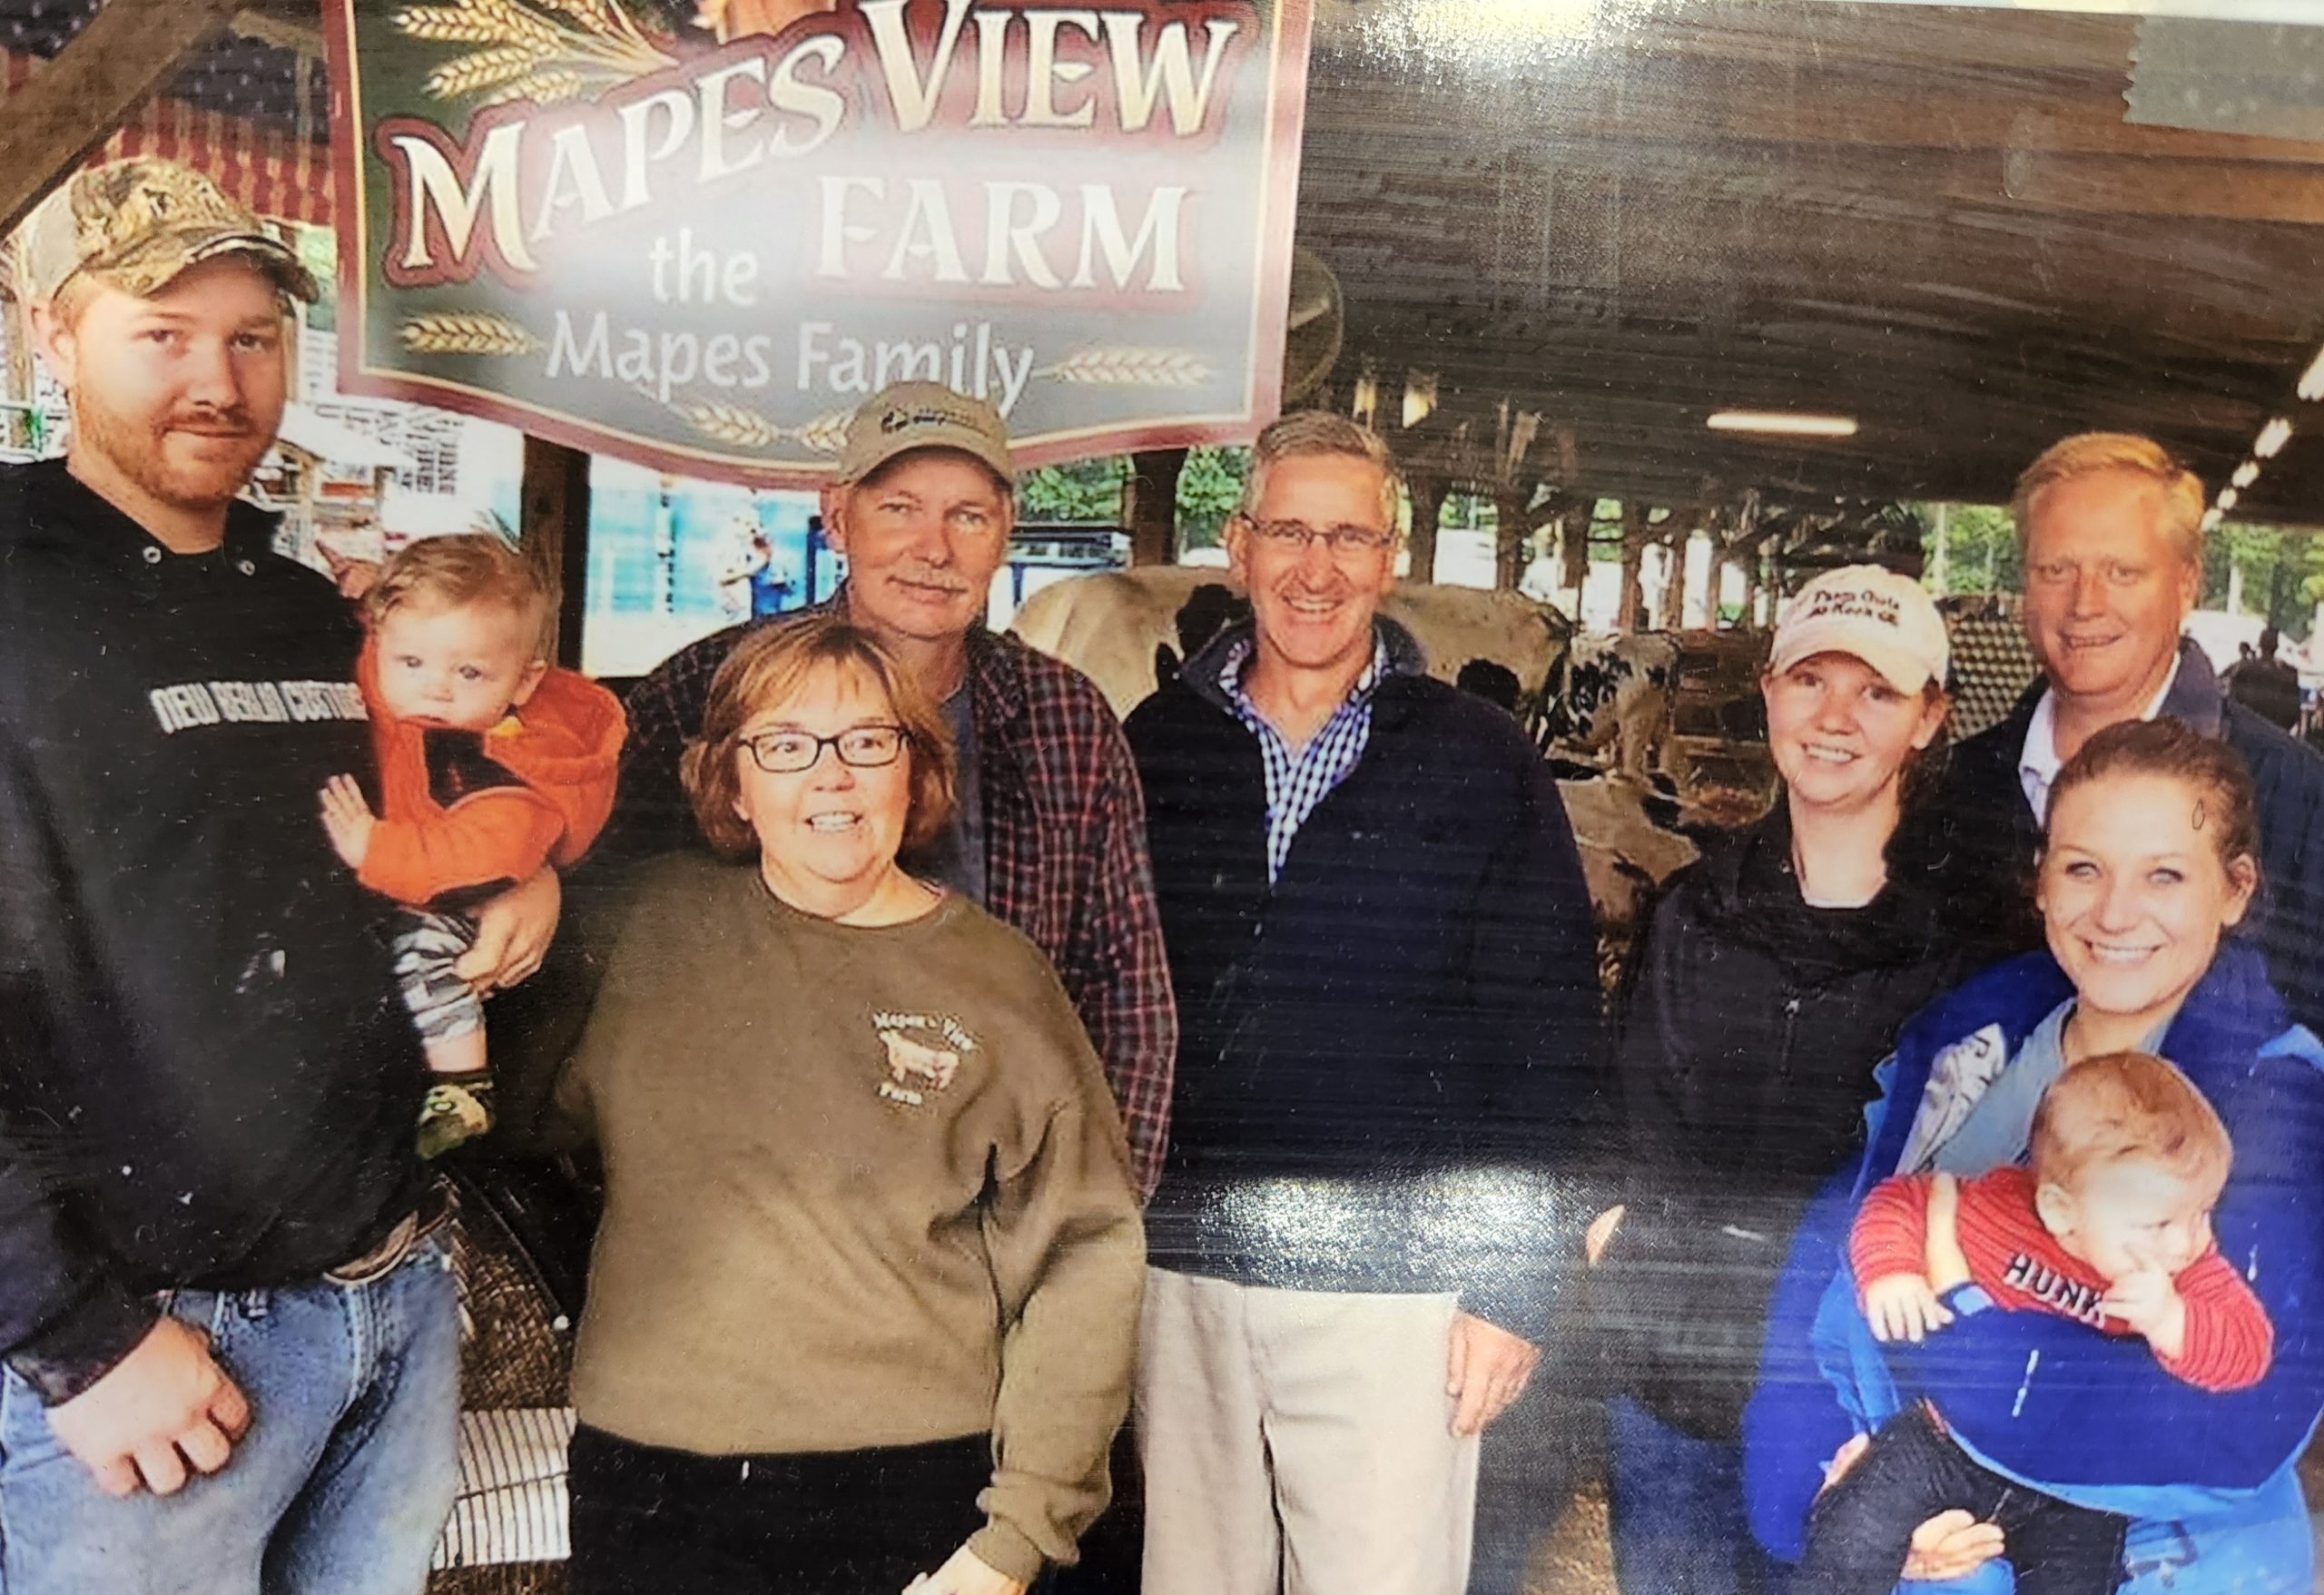 The Mapes family is in front of the Mapes View Farm sign.